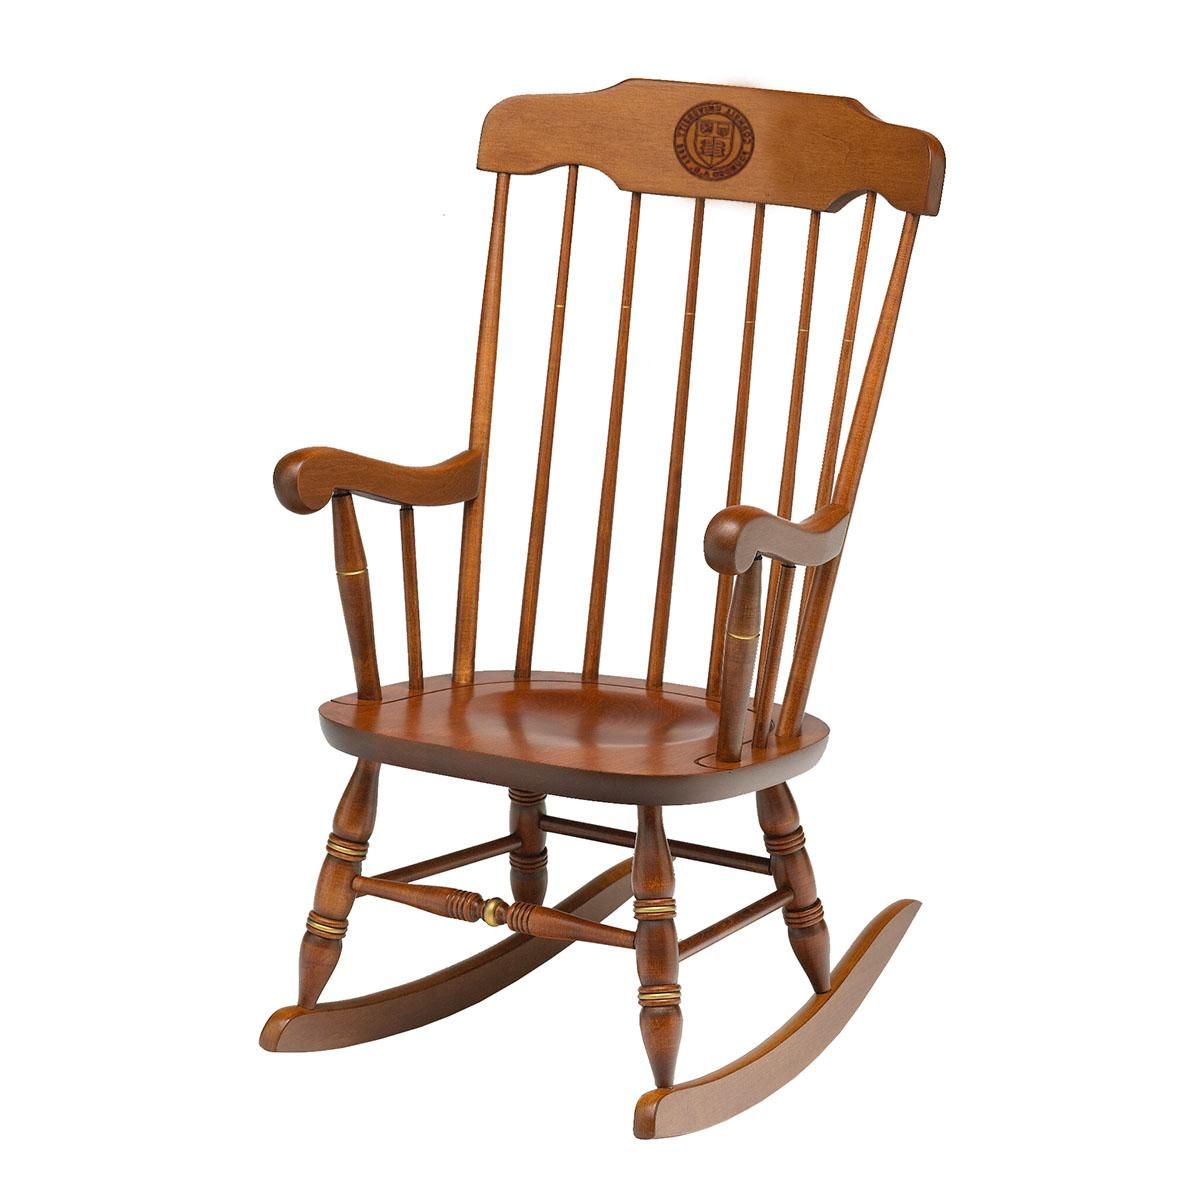 Dark Natural Rocking Chairs Intended For Latest Boston All Cherry Wood Rocking Chair (View 7 of 15)